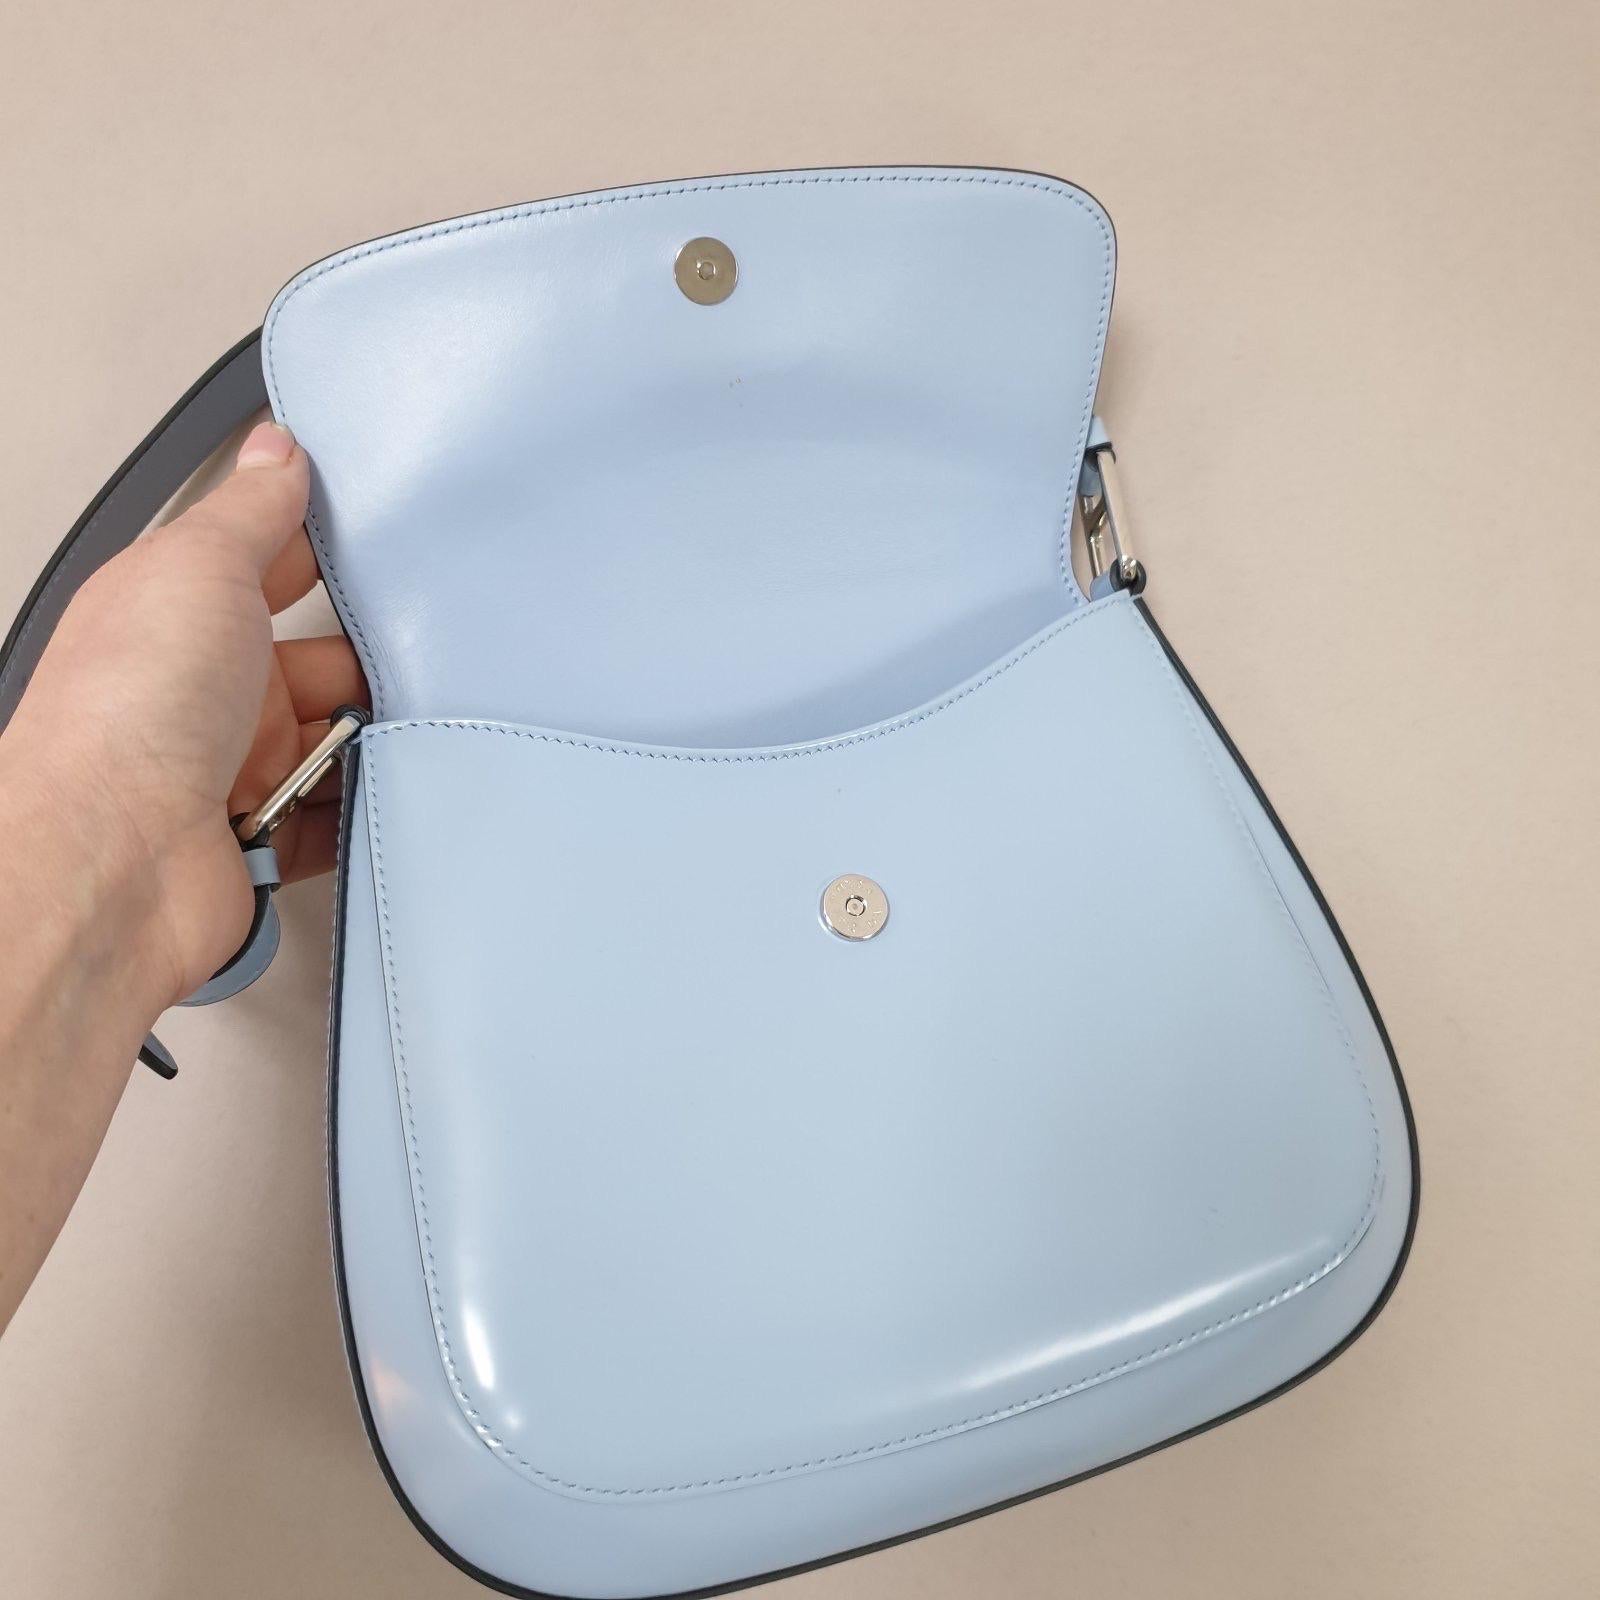 This Prada Cleo shoulder bag is made from blue brushed leather with silver tone hardware. 
Details include a flat handle, back open pocket, and magnetic snap closure. 
The interior is fully lined with one open pocket.
Measurements:
26 x 21 x 5